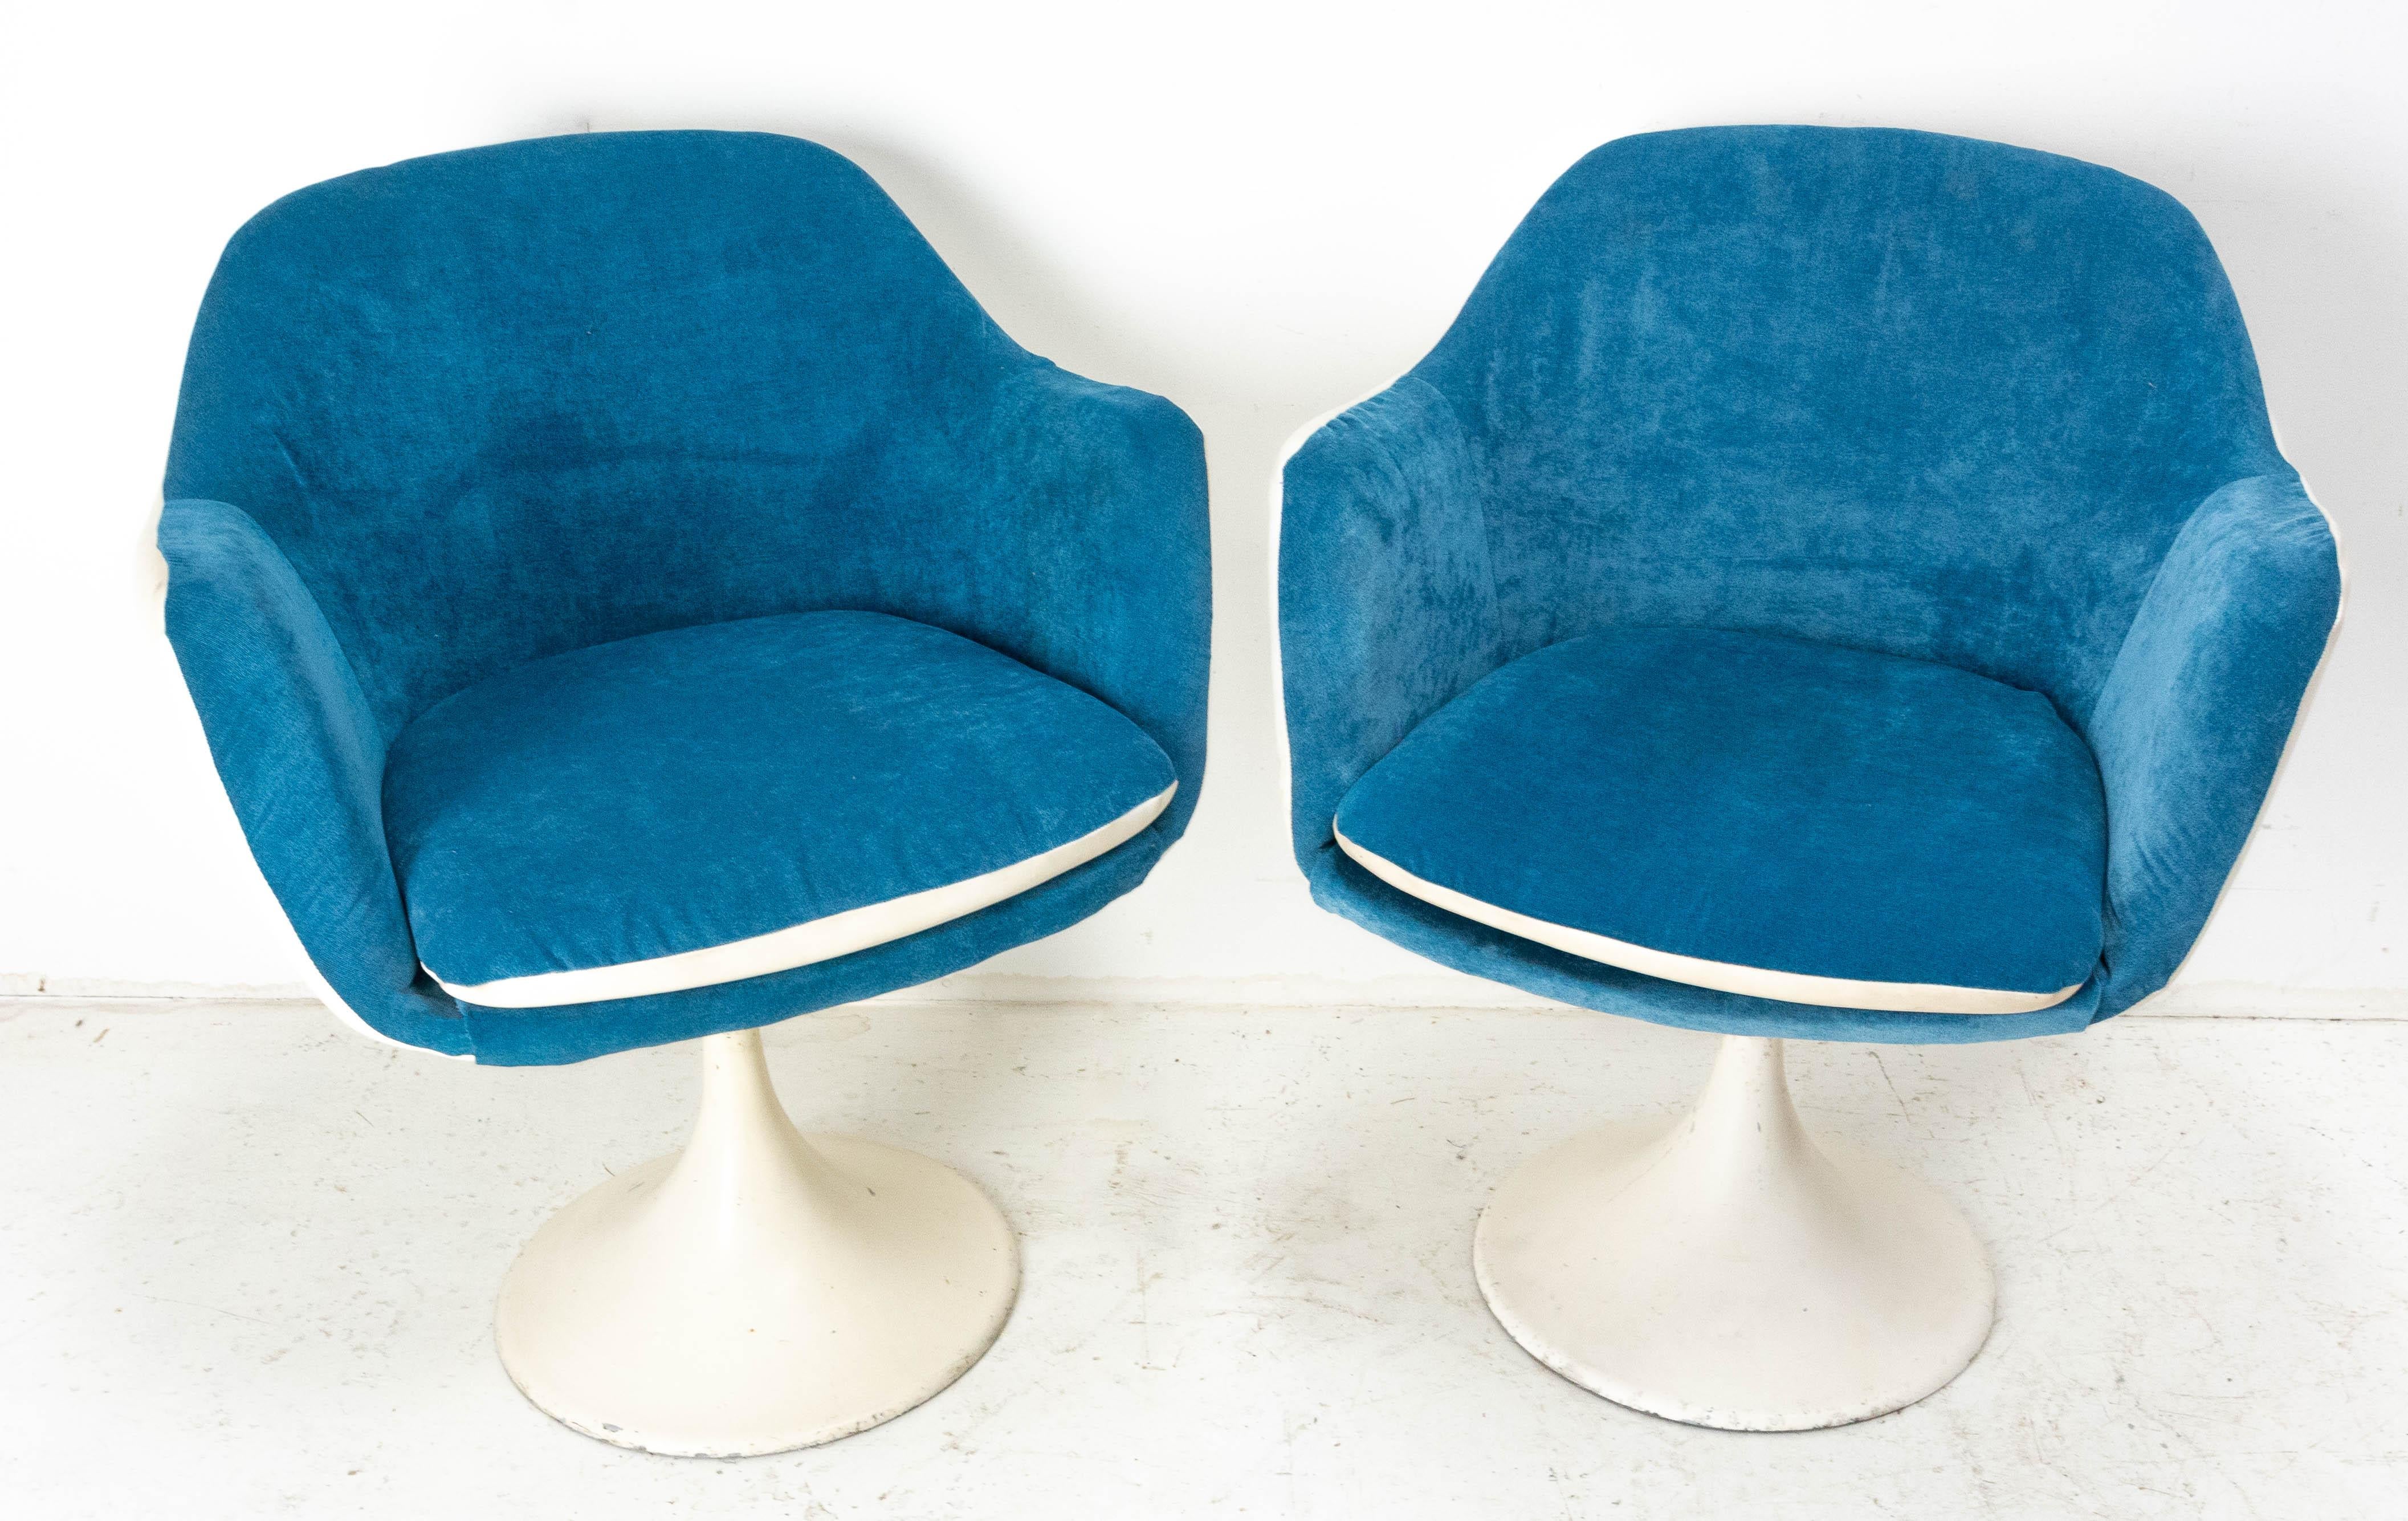 Two vintage fauteuils chauffeuse chairs,
Very typical of the 1970s 
The fabric is new
Good condition

Shipping:
L120 P67 H45 19Kg.